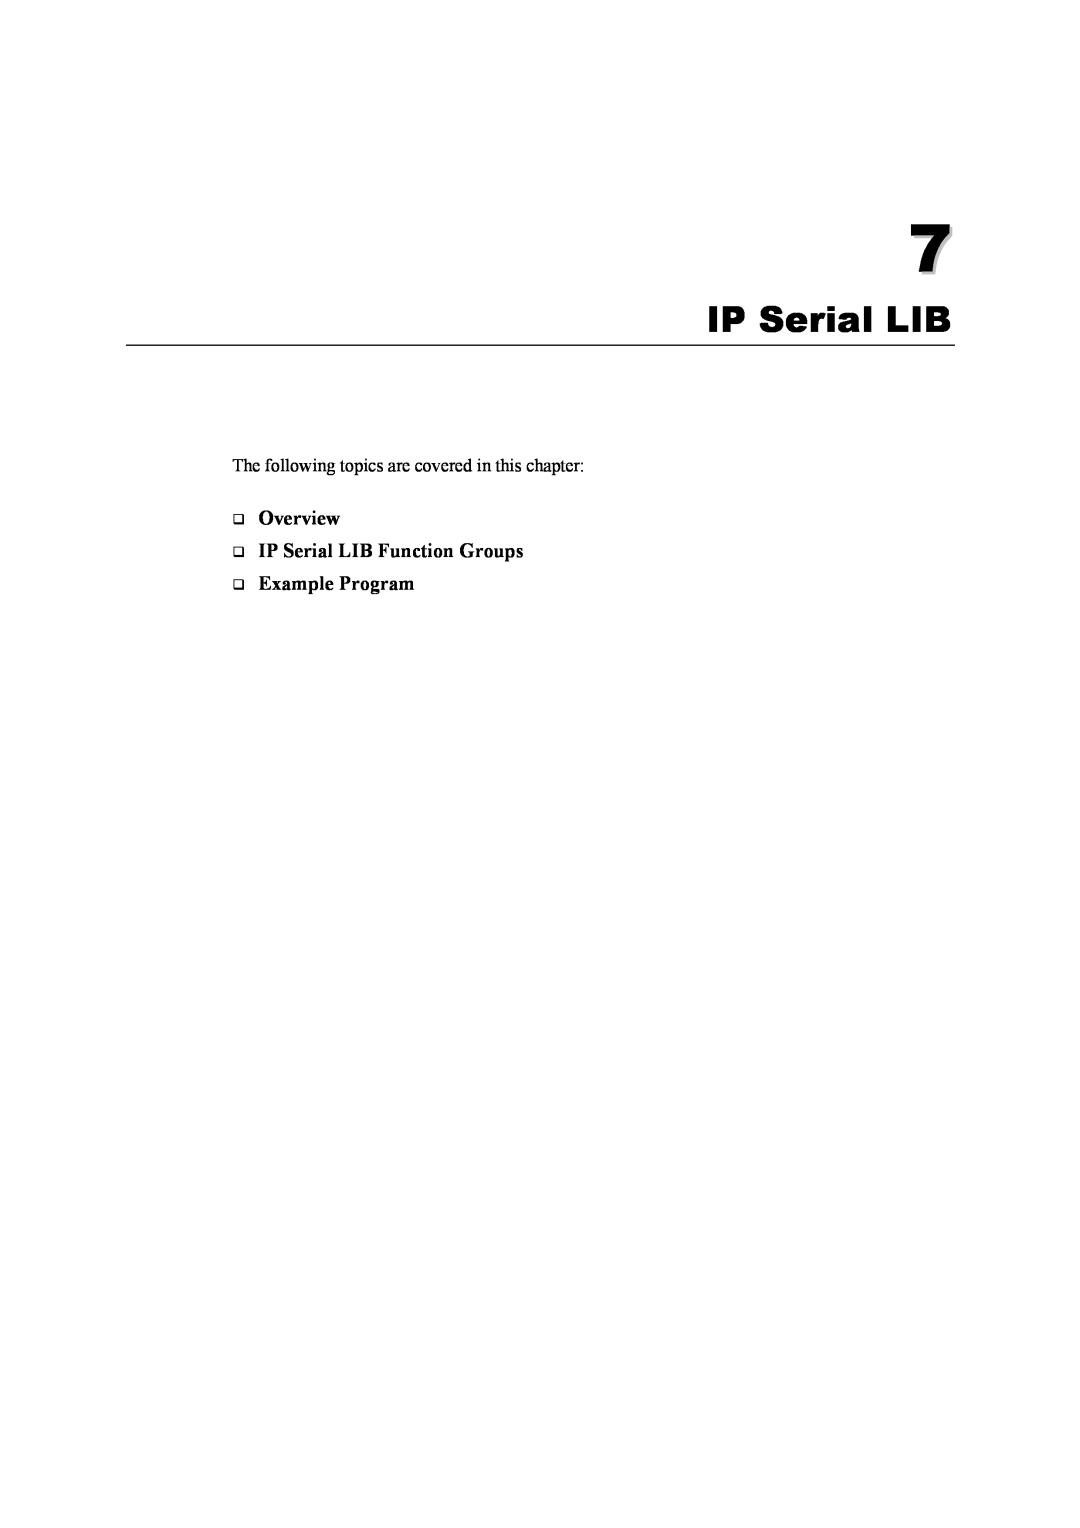 Moxa Technologies 5600 user manual ‰ Overview ‰ IP Serial LIB Function Groups ‰ Example Program 